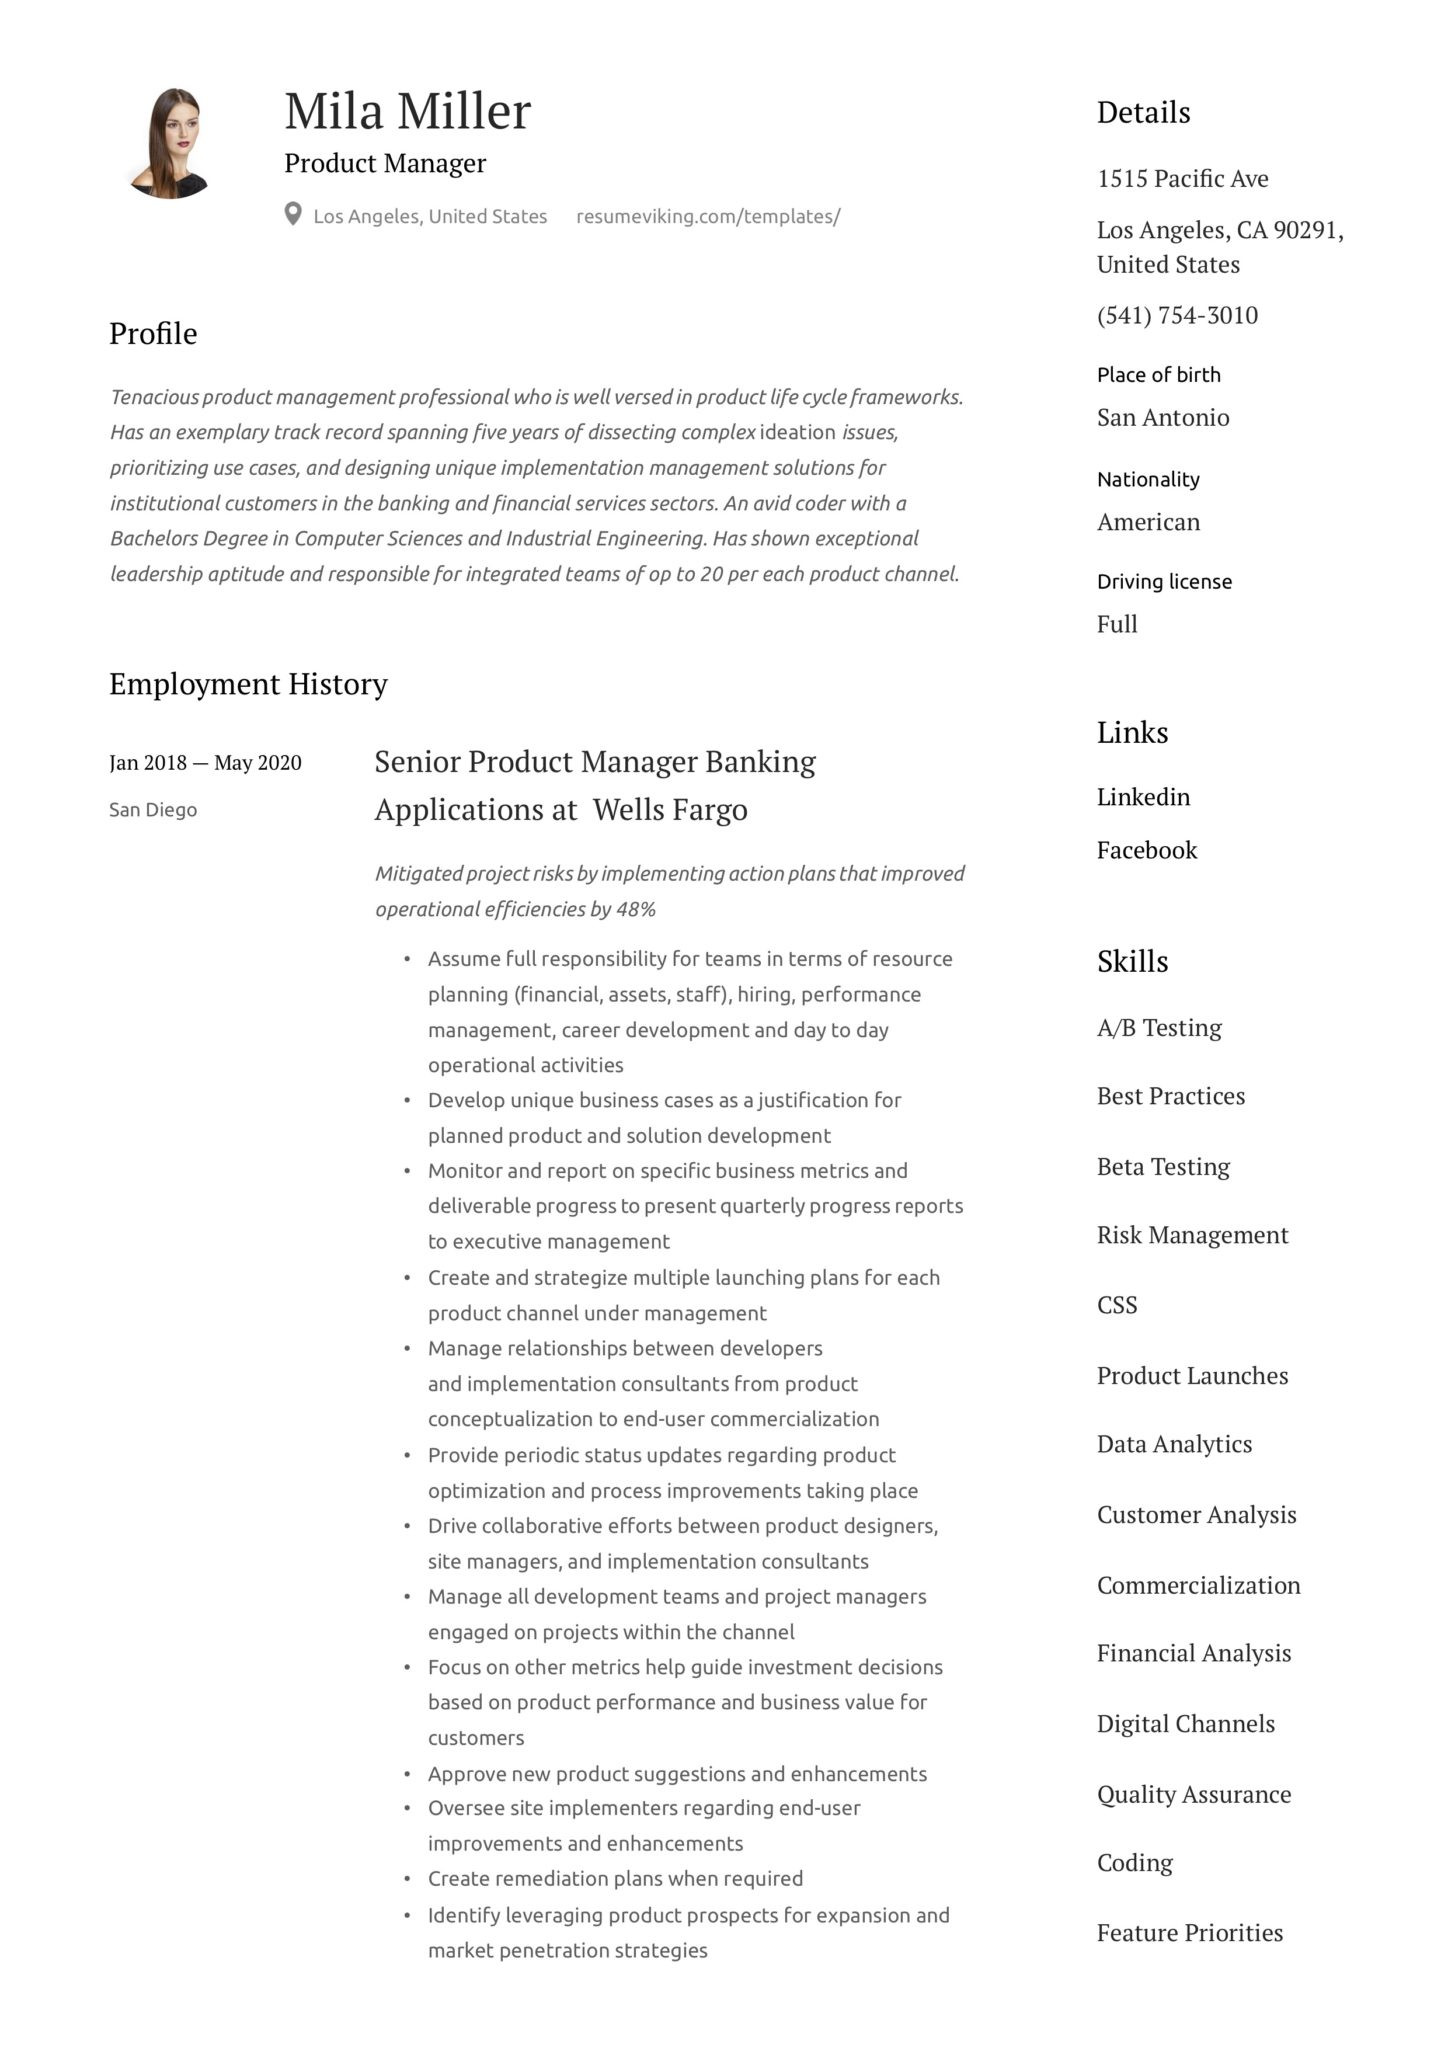 Sample Resume for Product Reporting Specialist In Device Making Company Product Manager Resume & Guide   12 Samples Pdf 2020